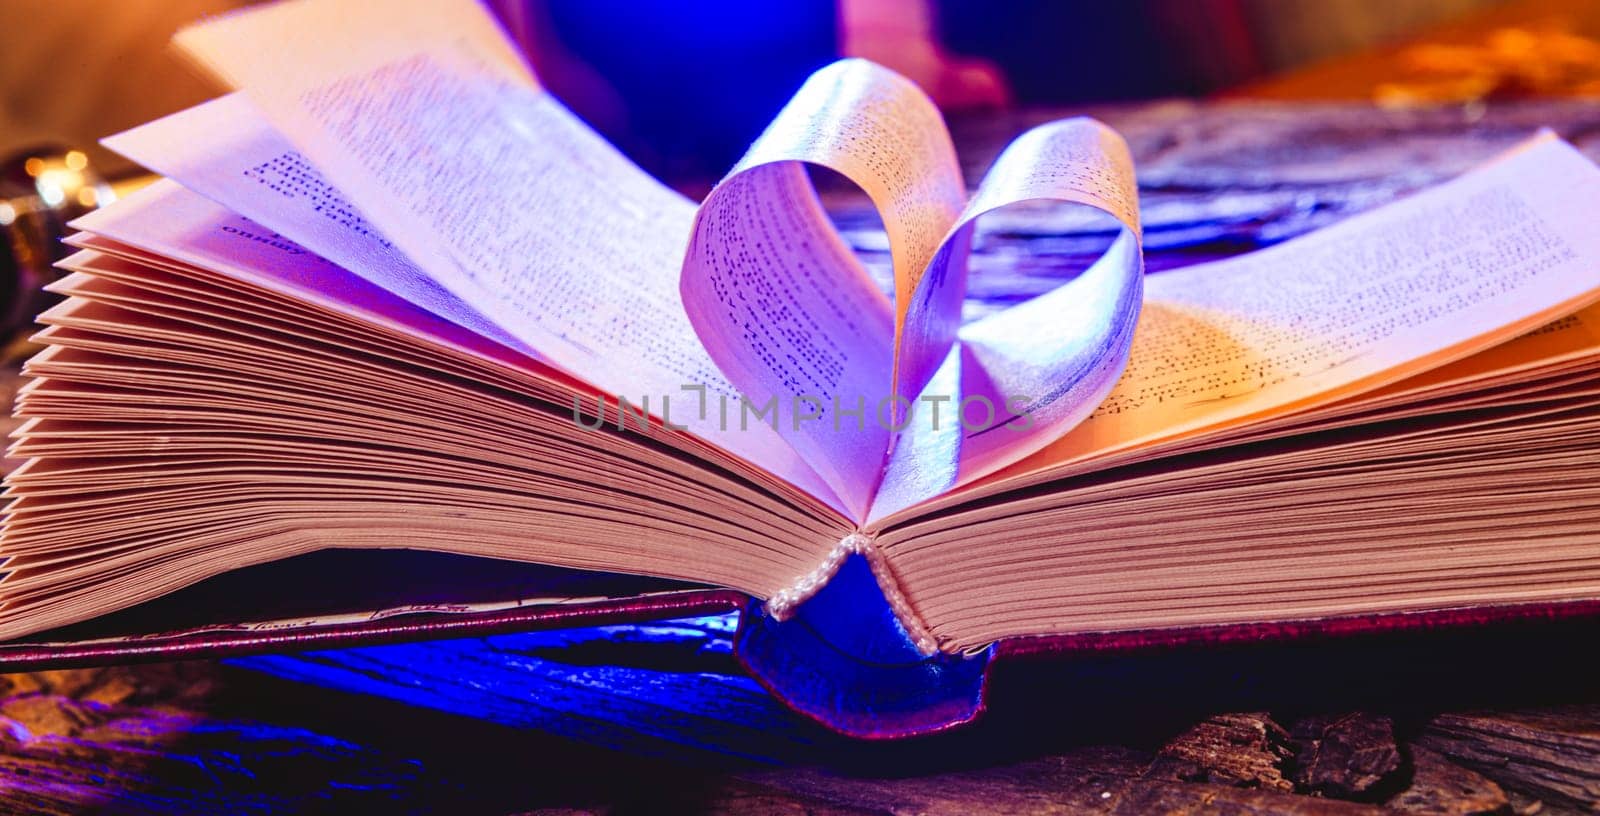 Stack of books in the colored cover lay on the table. Open book with curled leaves in the shape of a heart. Library, education. Love of books, reading. Empty space for Your text on the left. Shallow dof